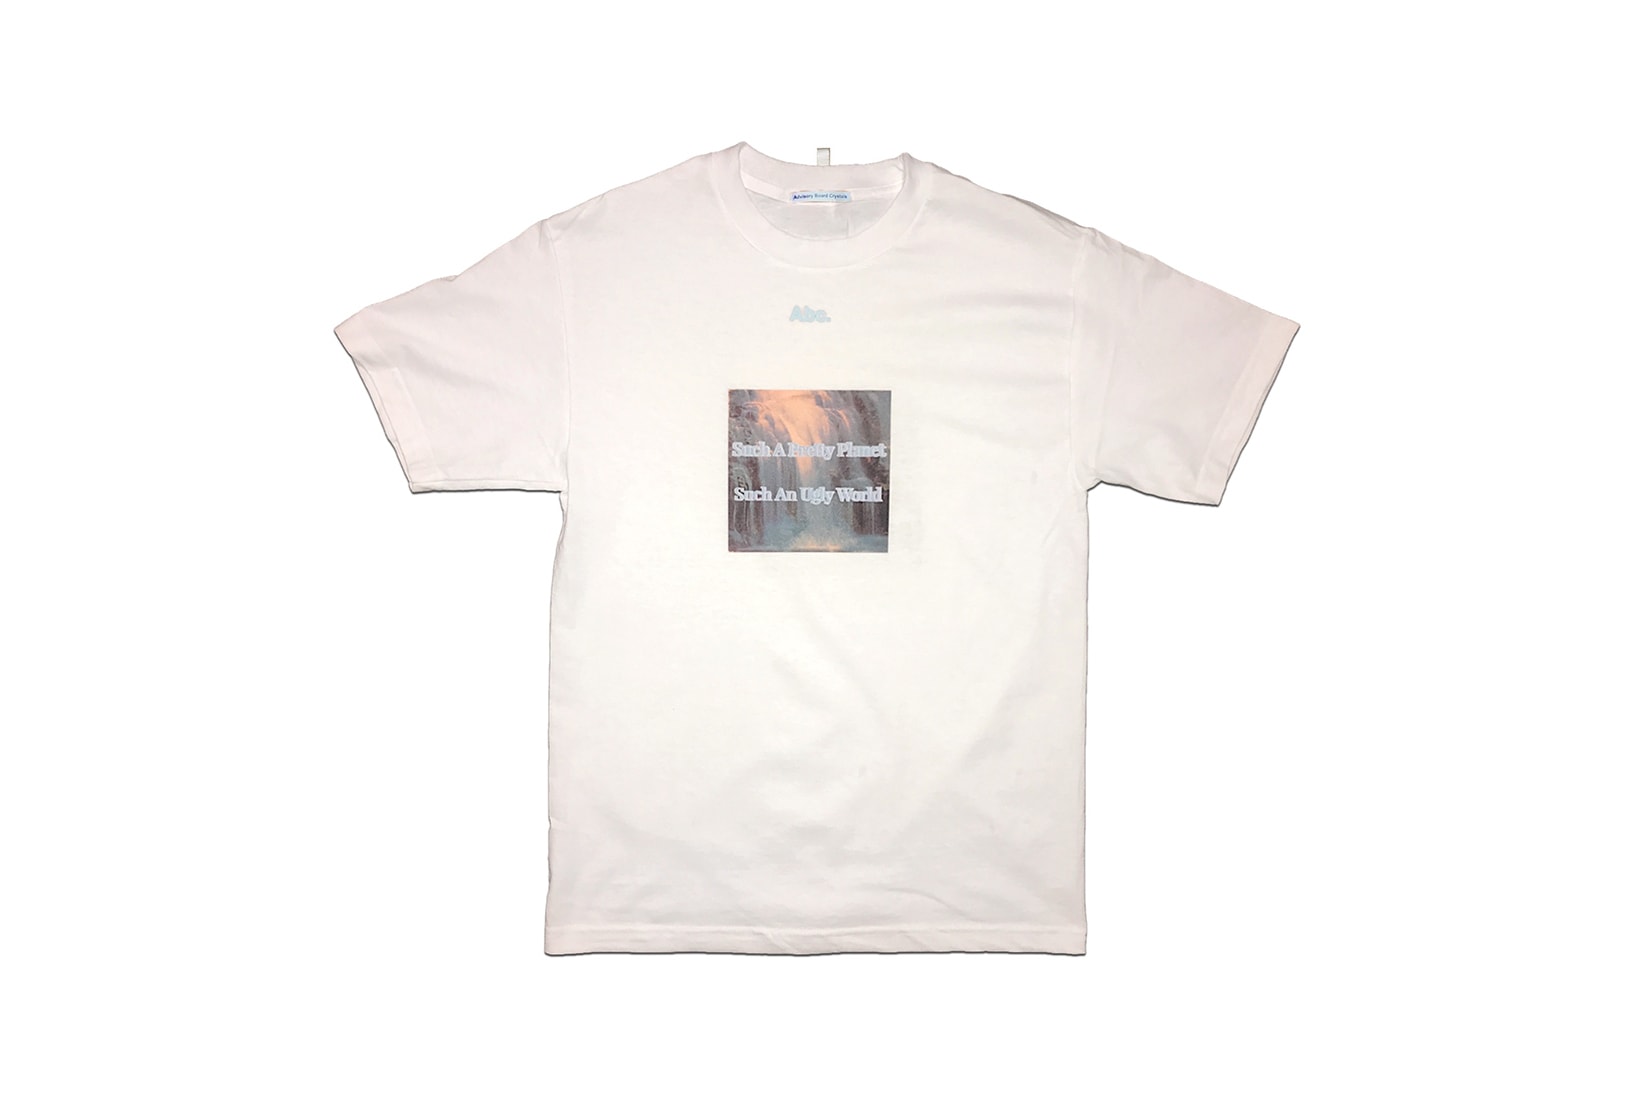 Advisory Board Crystals Abc. Graphic T-shirts Tees "Such a Pretty Planet" Capsule